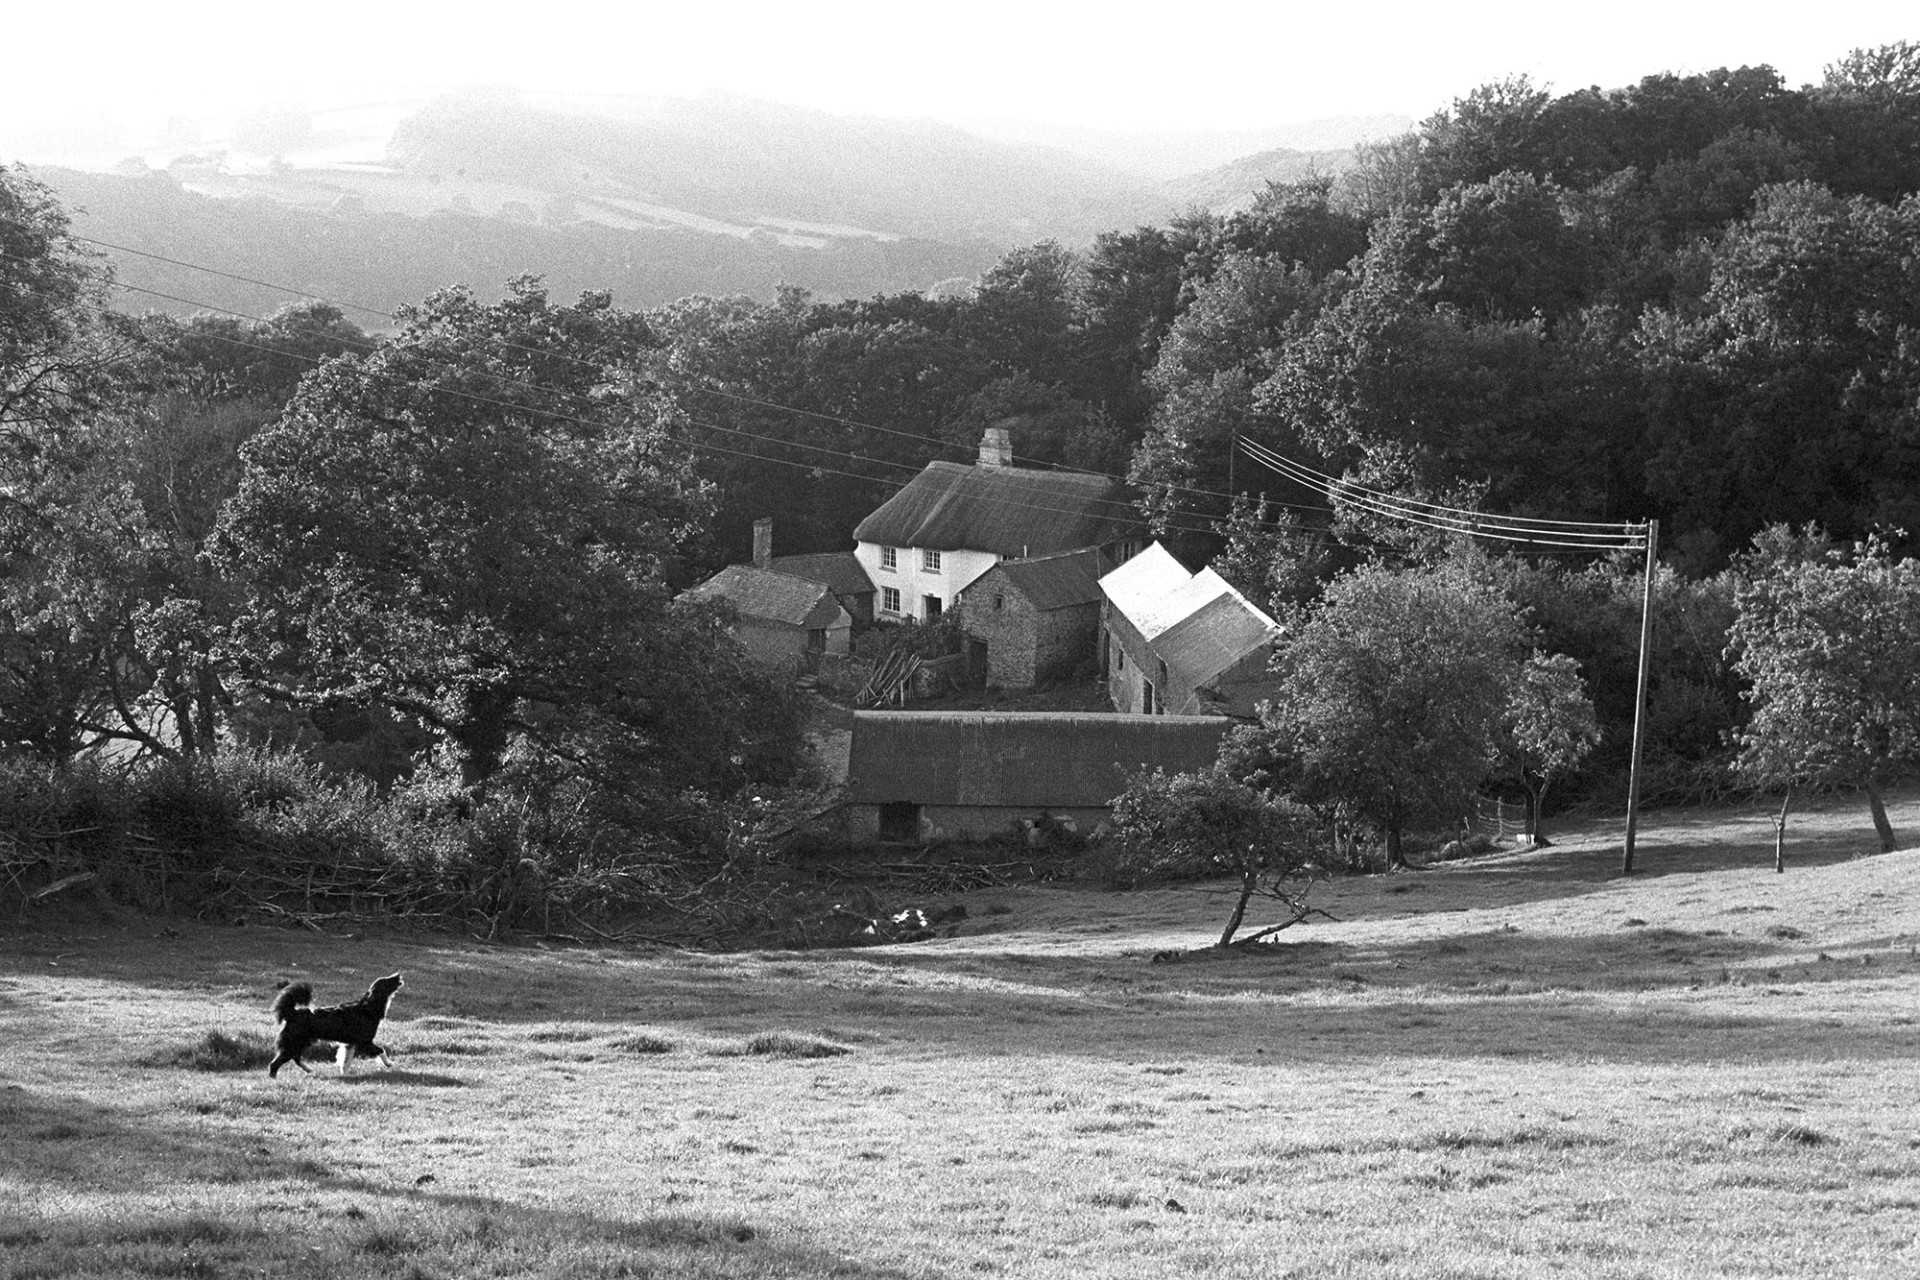 Cob and thatch farmhouse in wood. Dog.
[A cob and thatch farmhouse and barns set in a wooded hillside at Ashwell, Dolton.  A dog is trotting in a field in the foreground.]